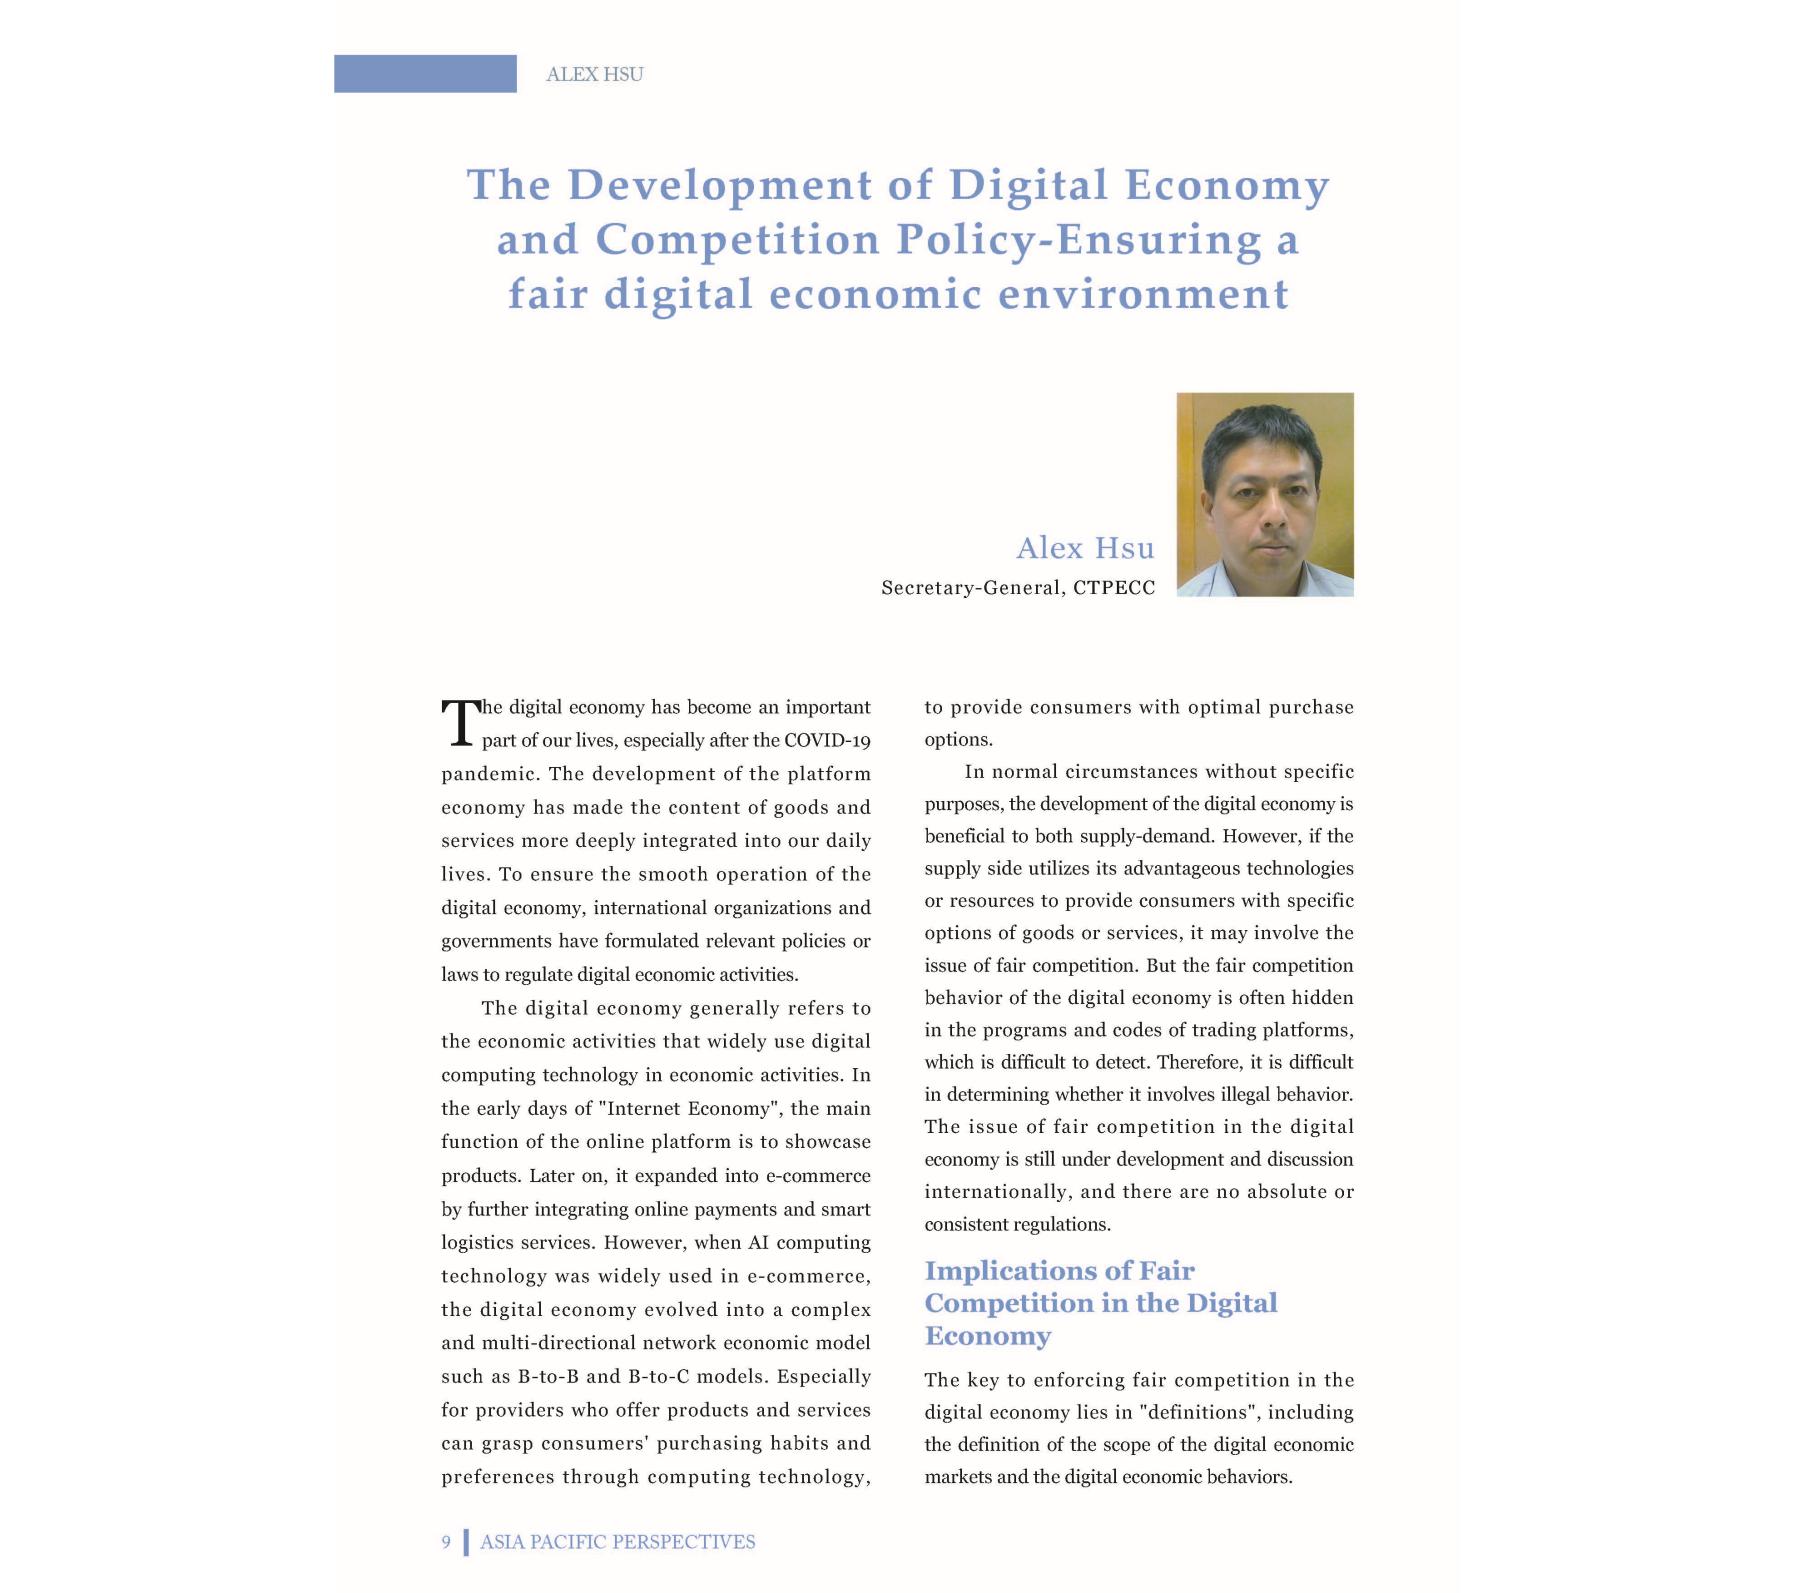 The Development of Digital Economy and Competition Policy-Ensuring a Fair Digital Economic Environment